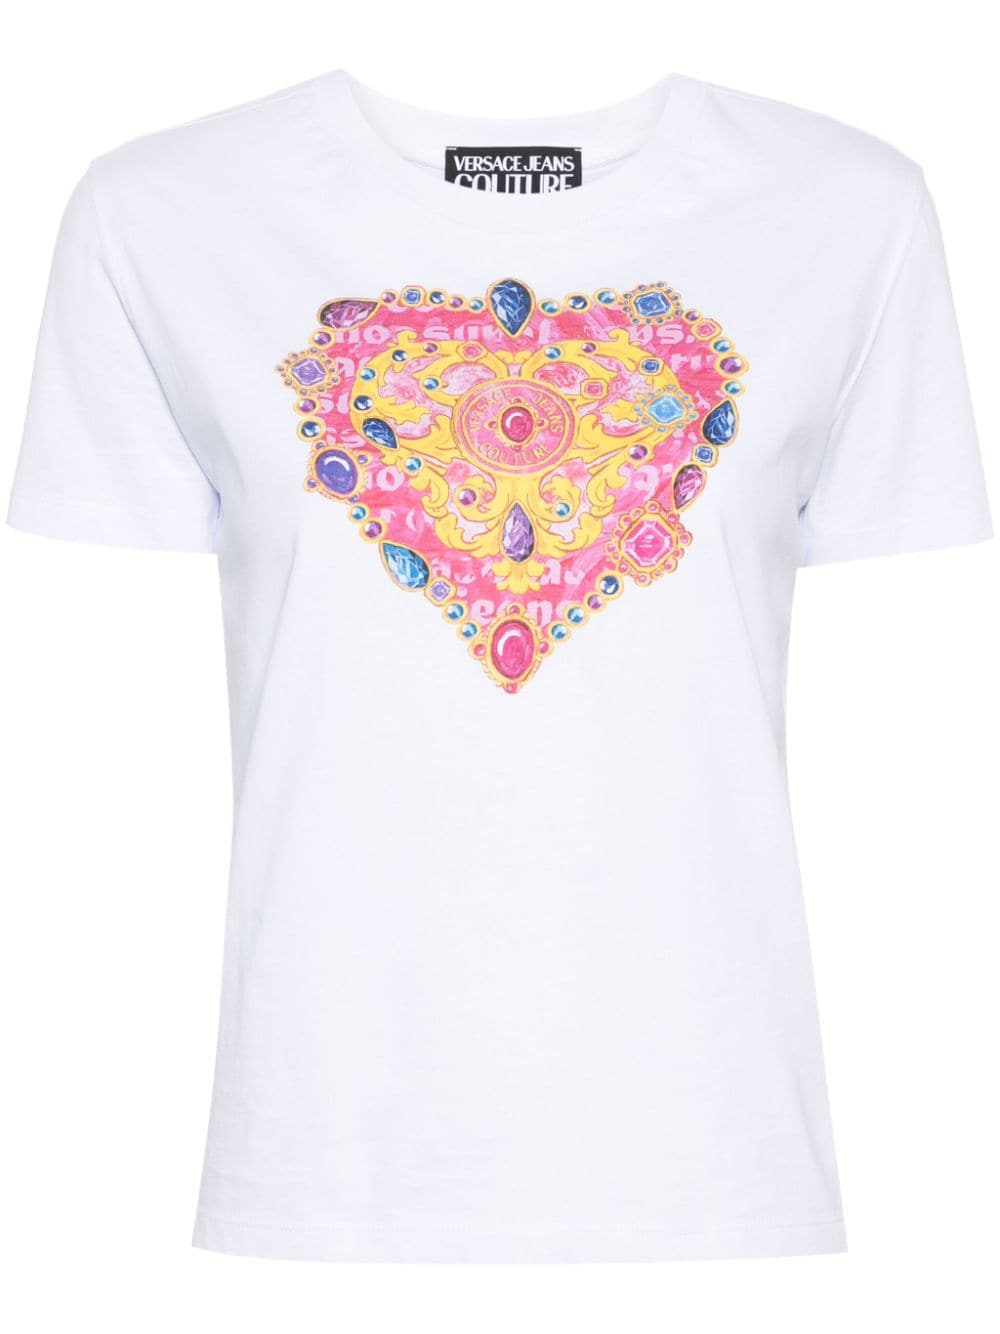 Versace Jeans Couture Heart Couture T-Shirt - Weiß von Versace Jeans Couture